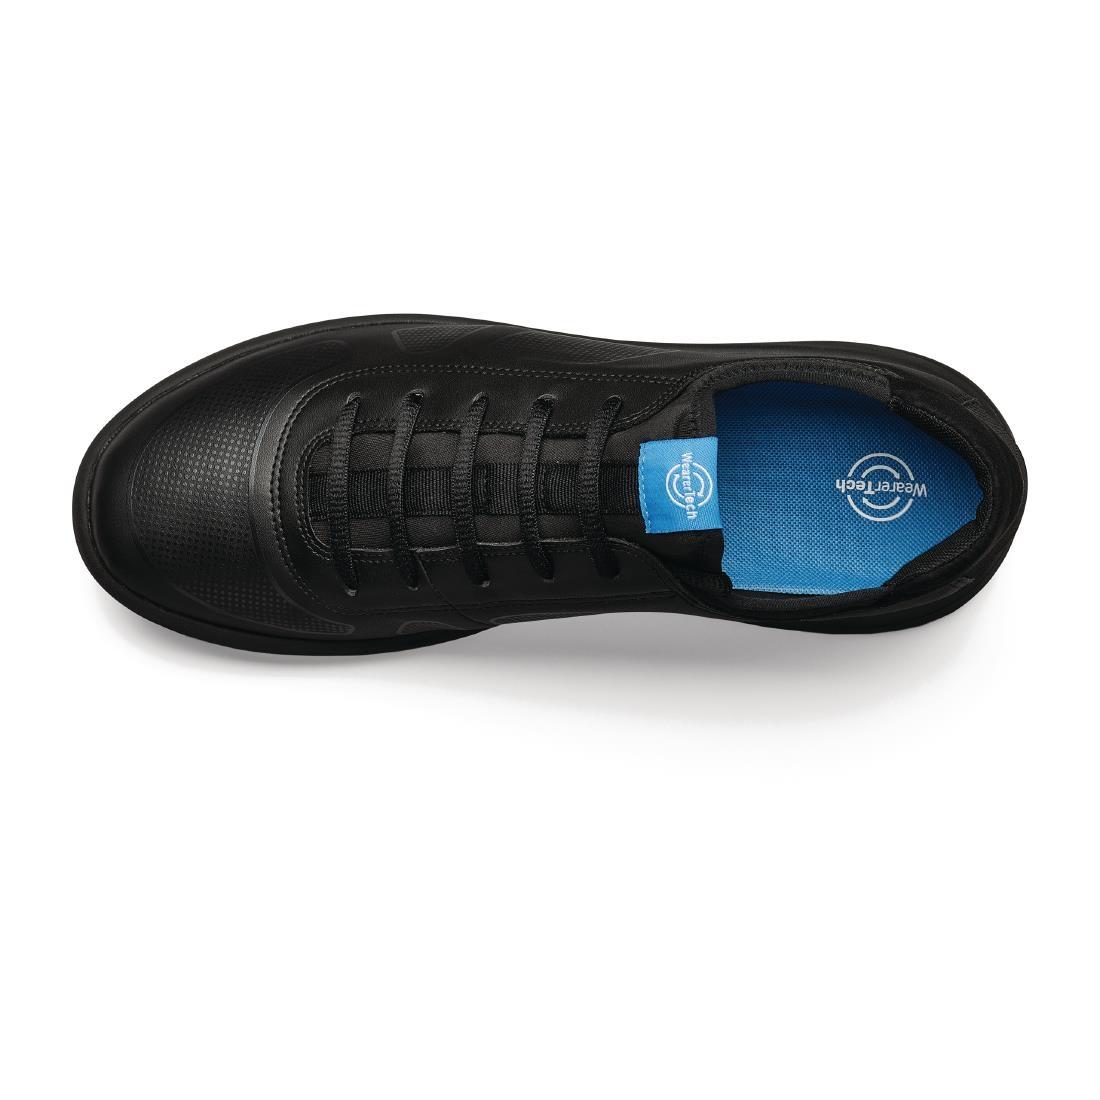 WearerTech Transform Trainer Black with Firm Insoles Size 43 - BB559-9  - 5